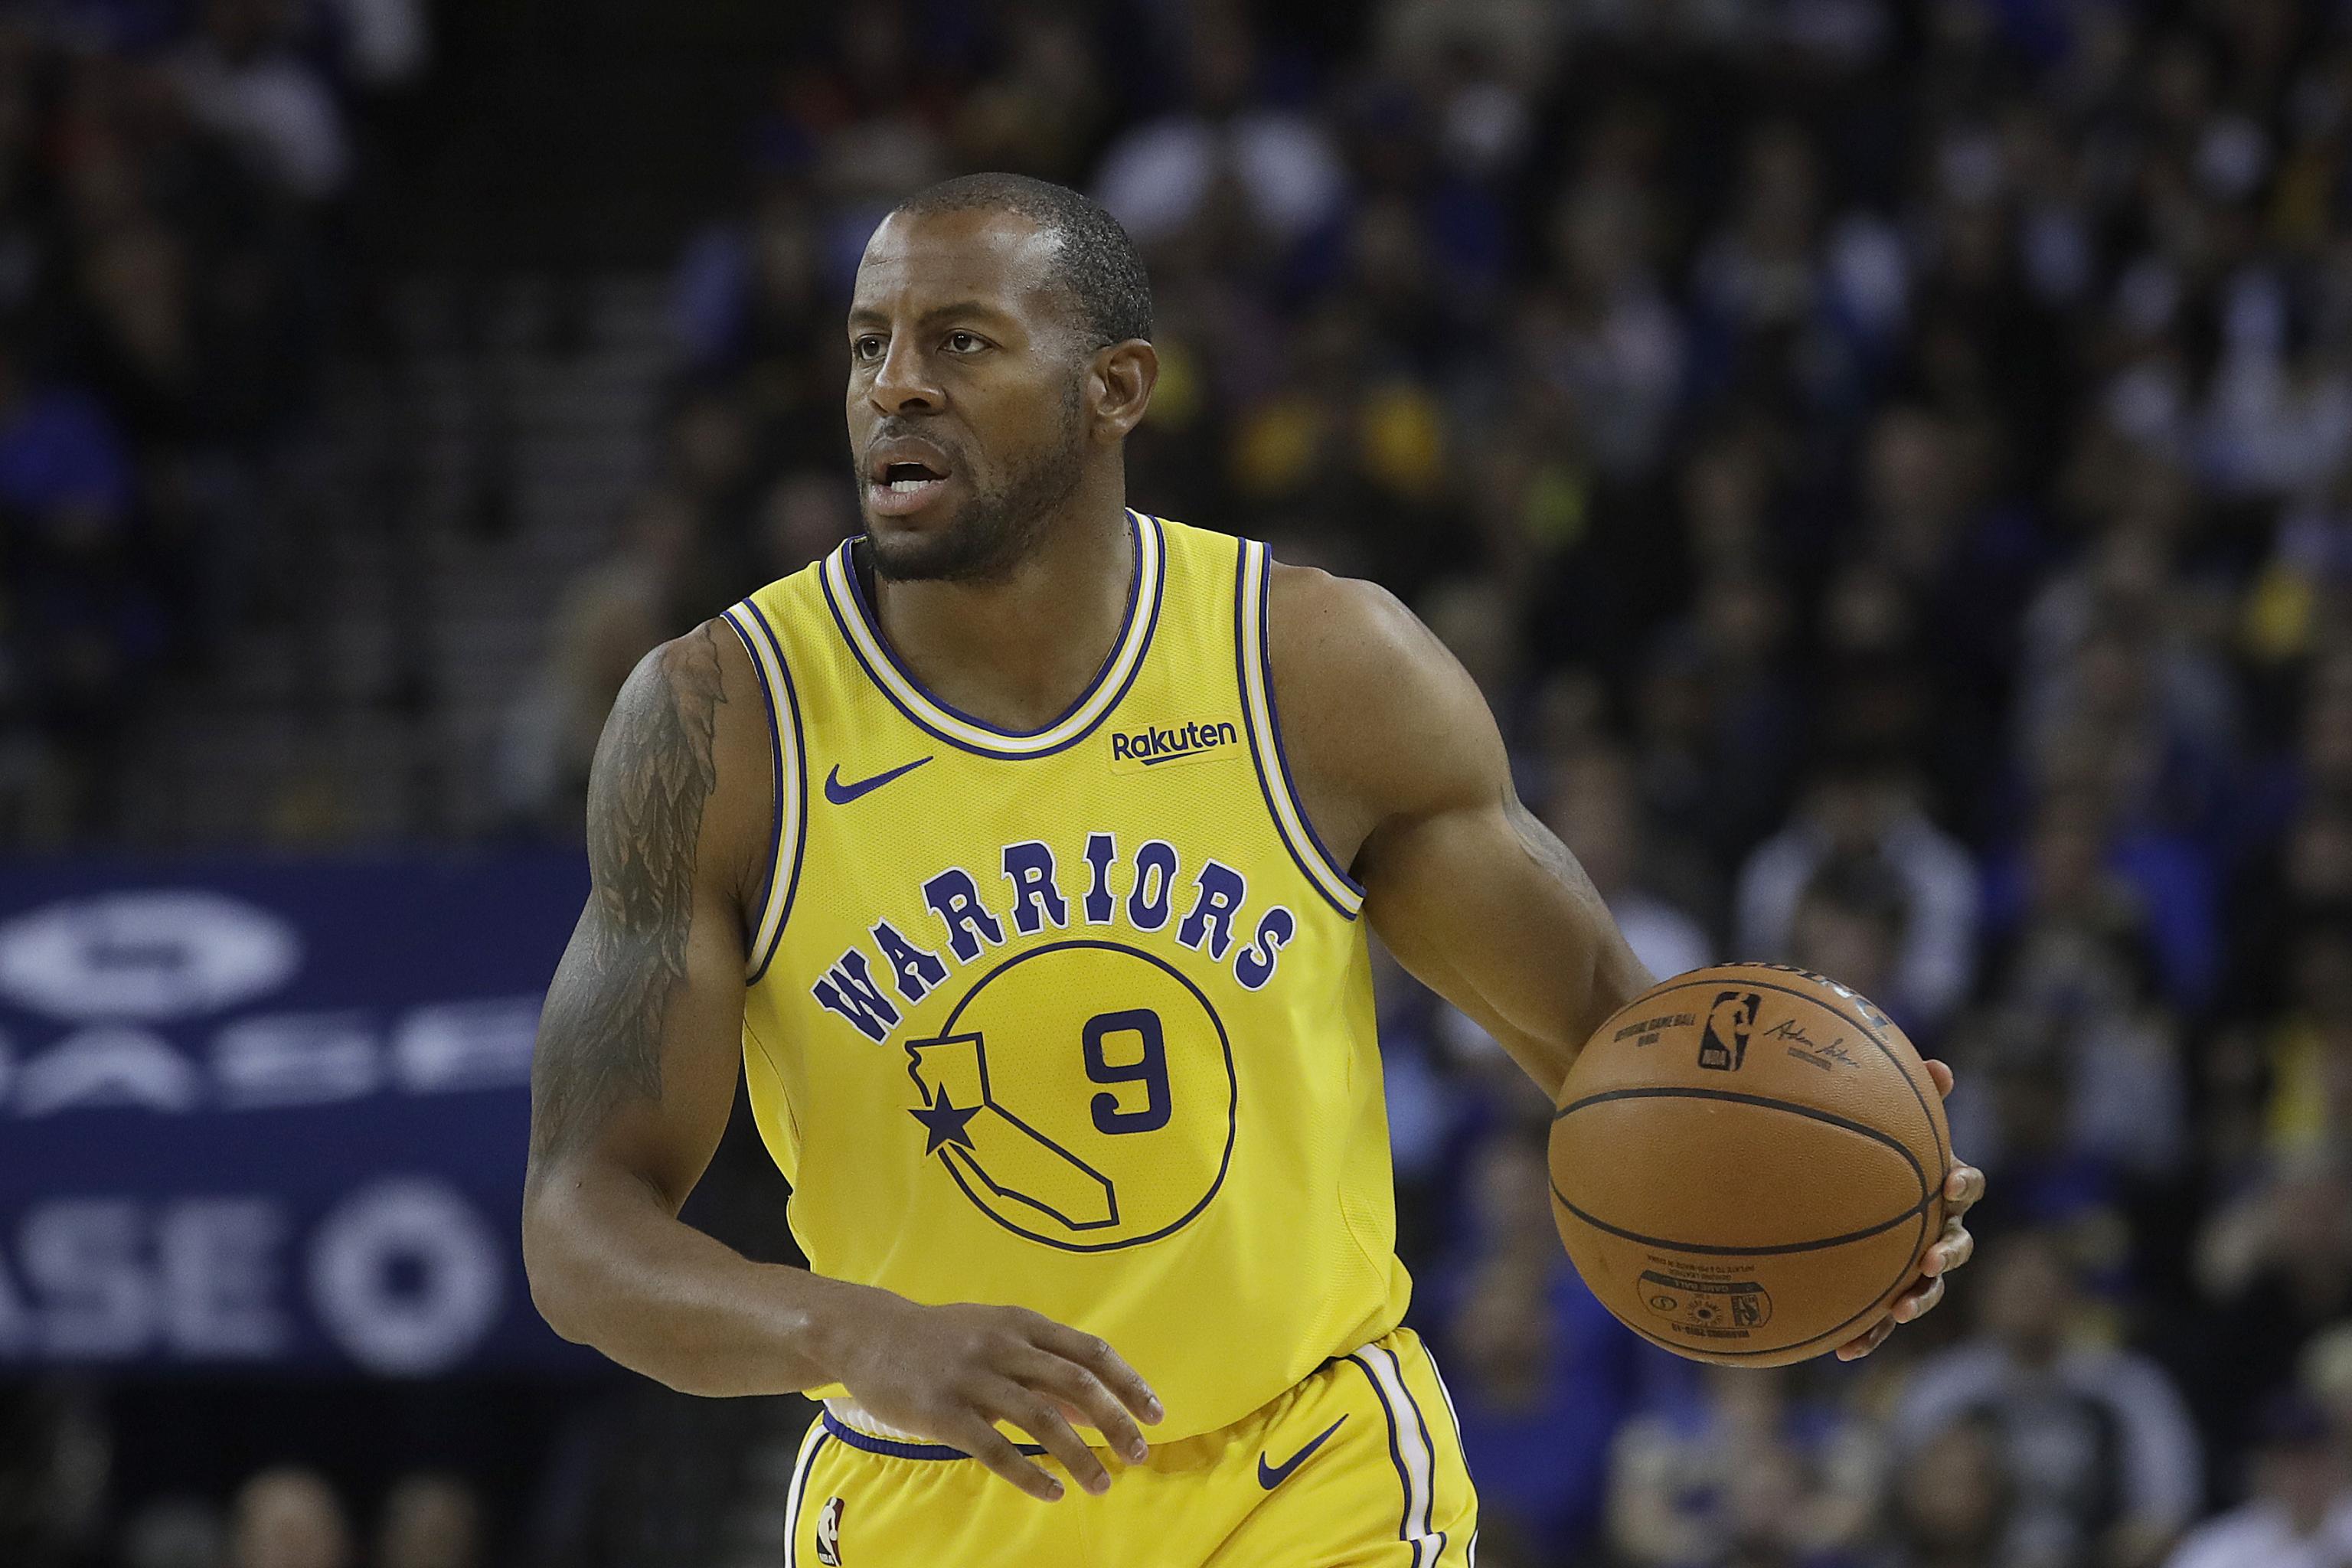 Andre Iguodala trade a win for the Miami Heat but not a home run, NBA News